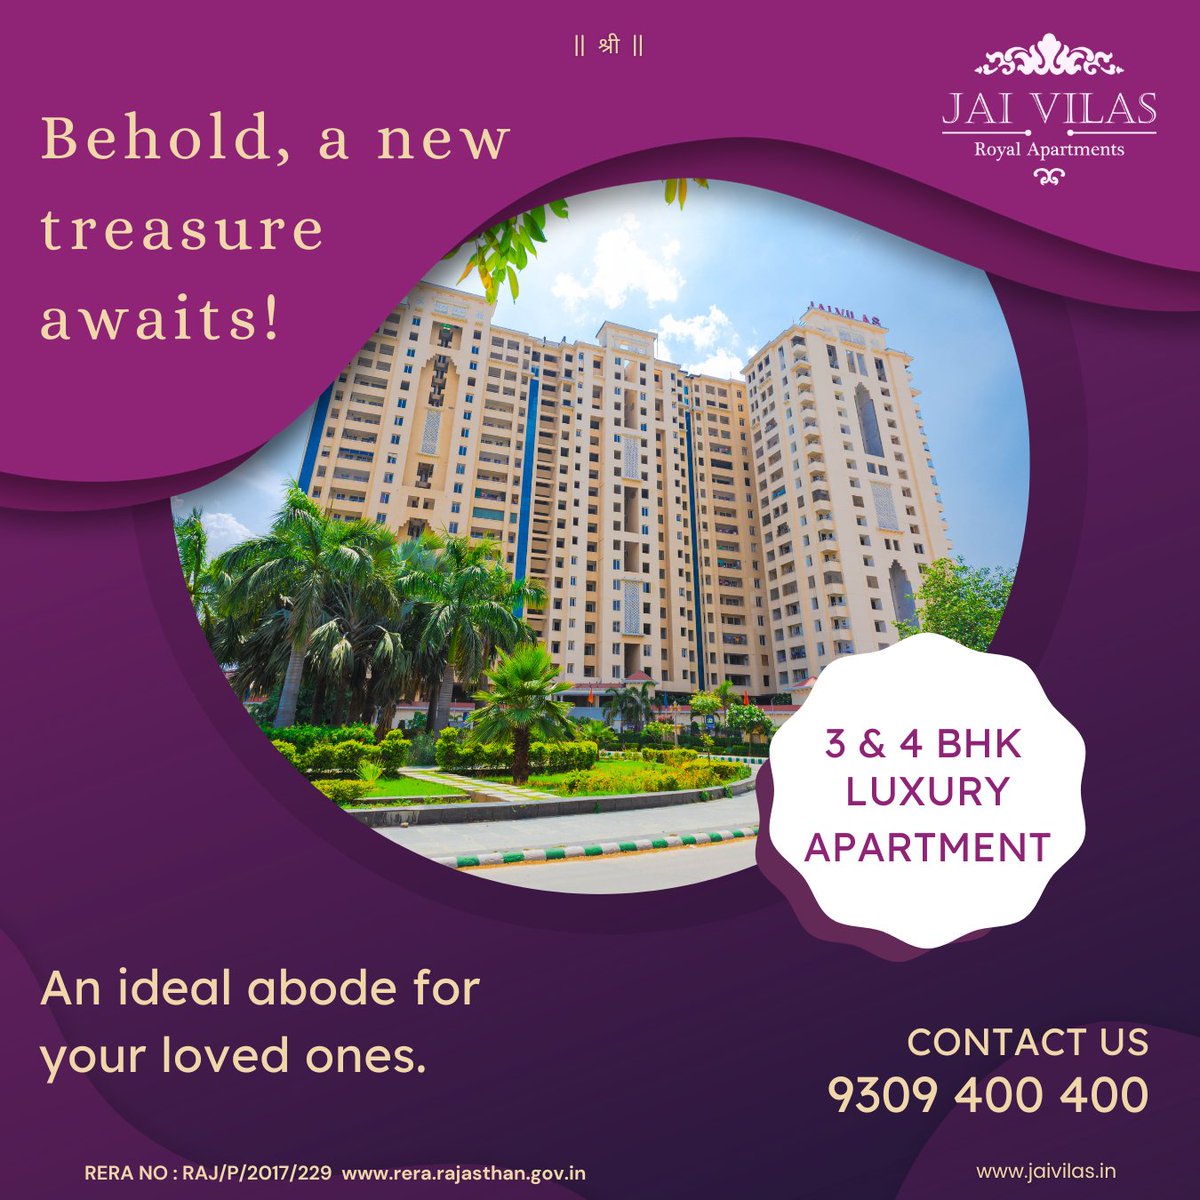 Explore our exquisite 3BHK and luxurious 4BHK flats with breathtaking views and modern amenities. Elevate your lifestyle today! 🏡

For more details contact: +91-9309400400
#JaiVilas #3bhkflats #luxuryflats #flatswithamenities #flatsforsale #dreamhome #jaipur #realestate